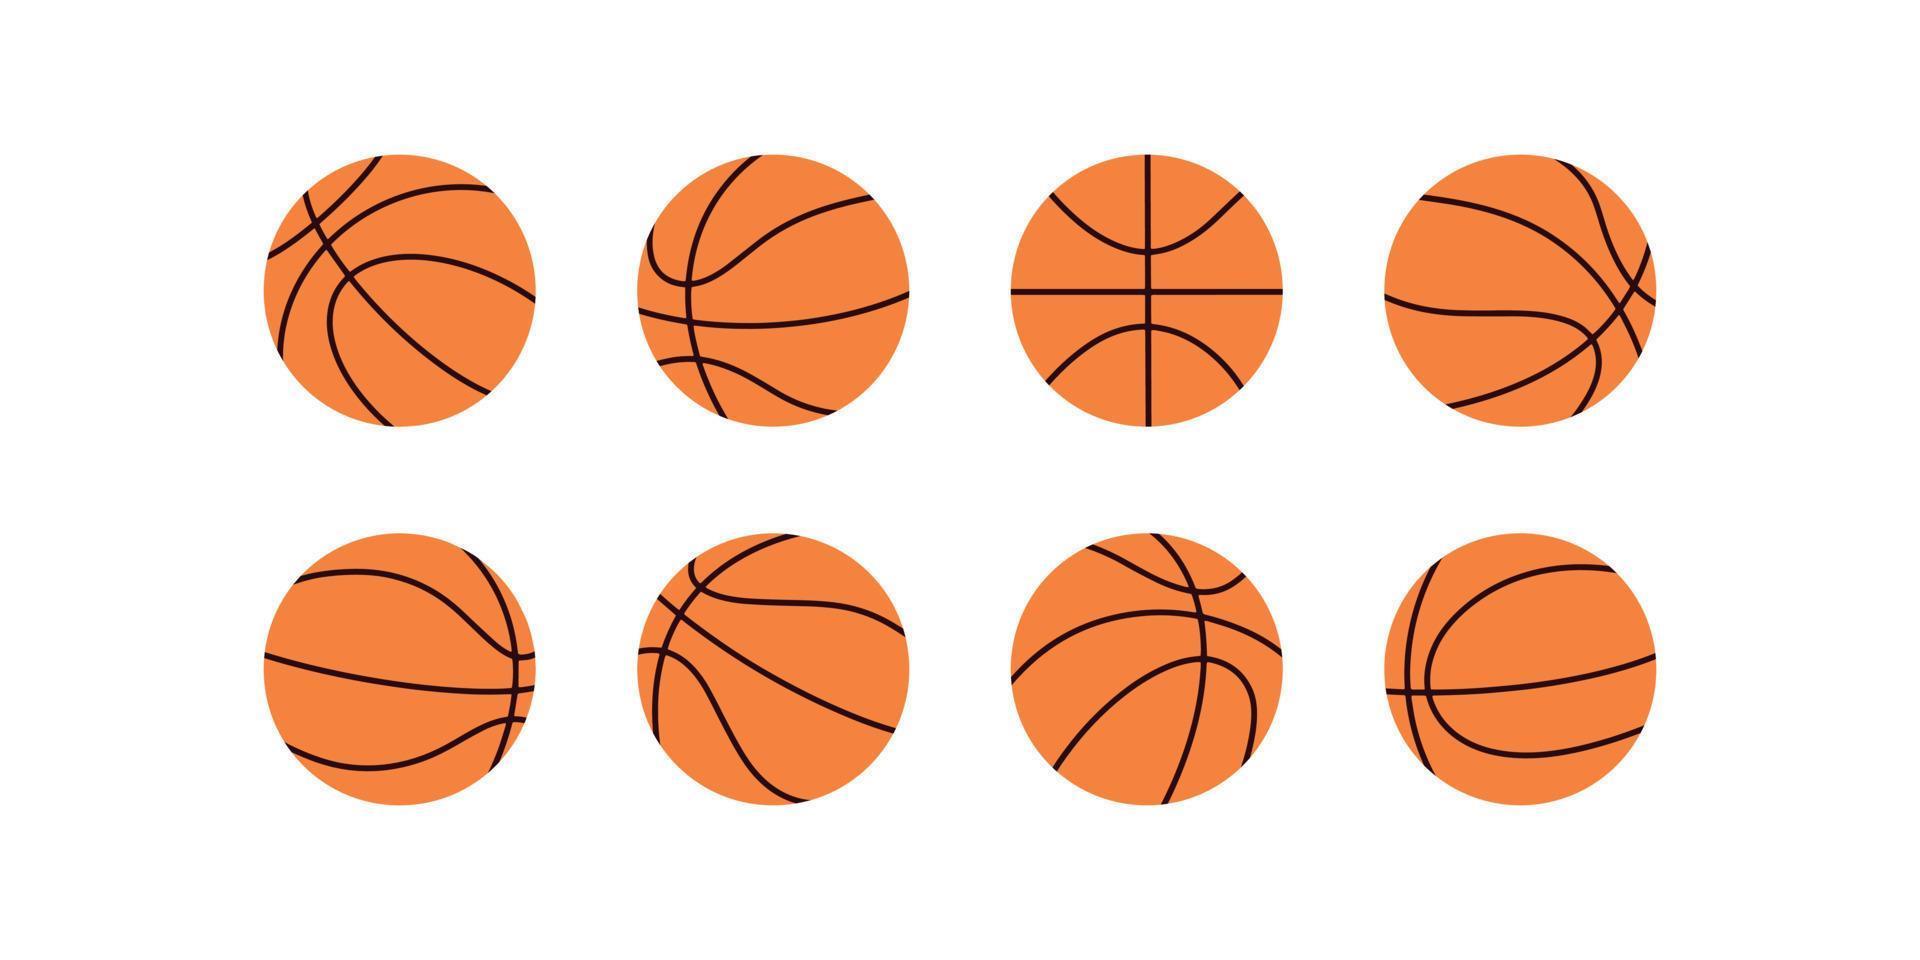 Basketball balls hand drawn icons. Sports equipment vector symbol isolated on white background.